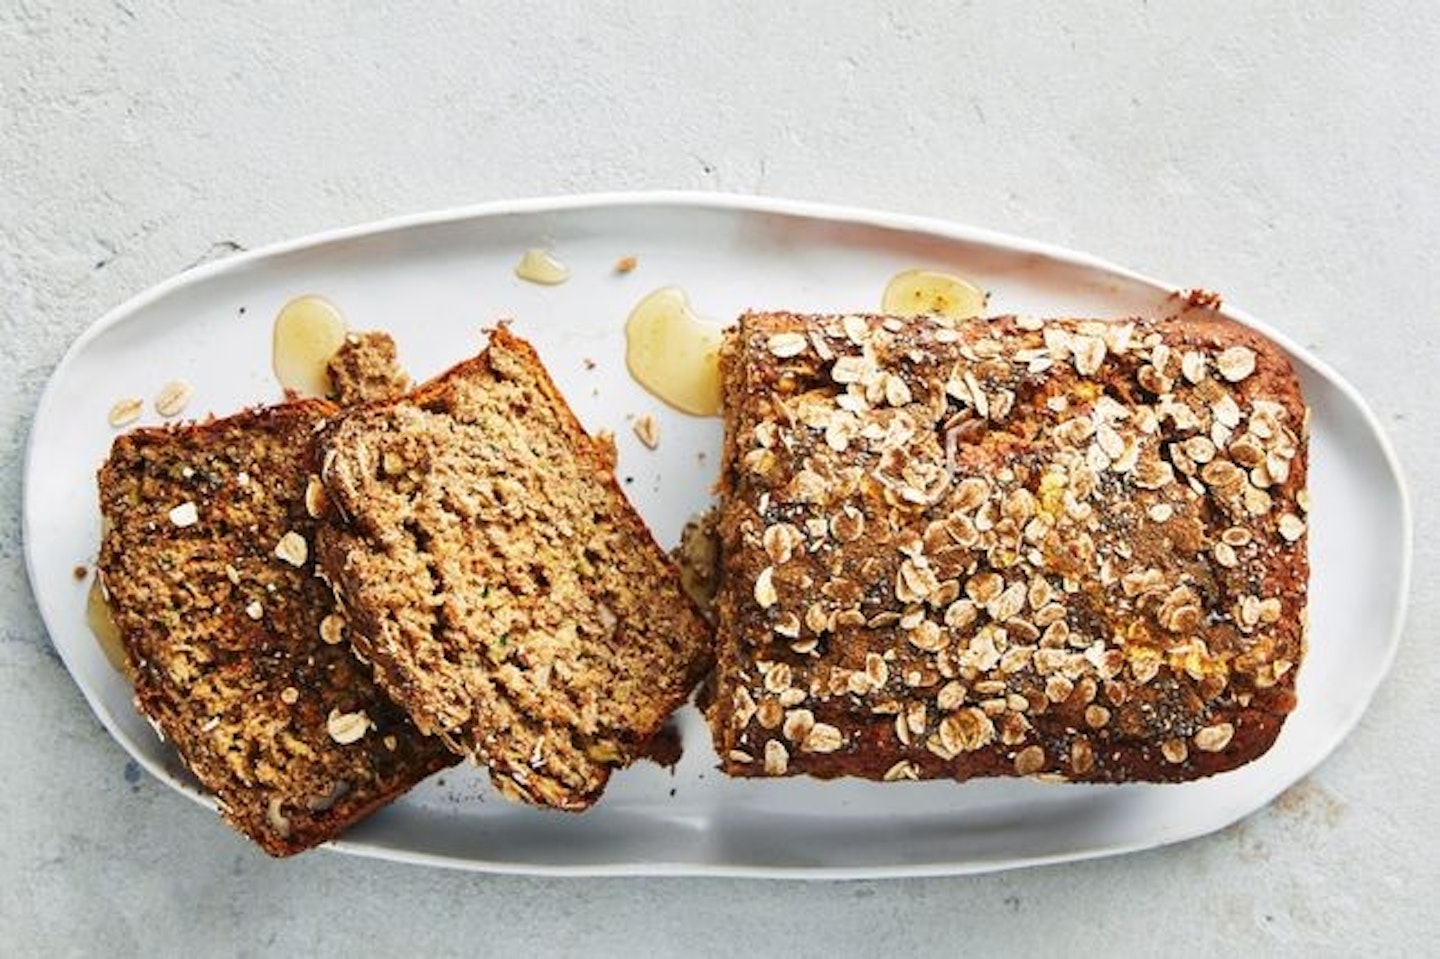 Banana and courgette bread